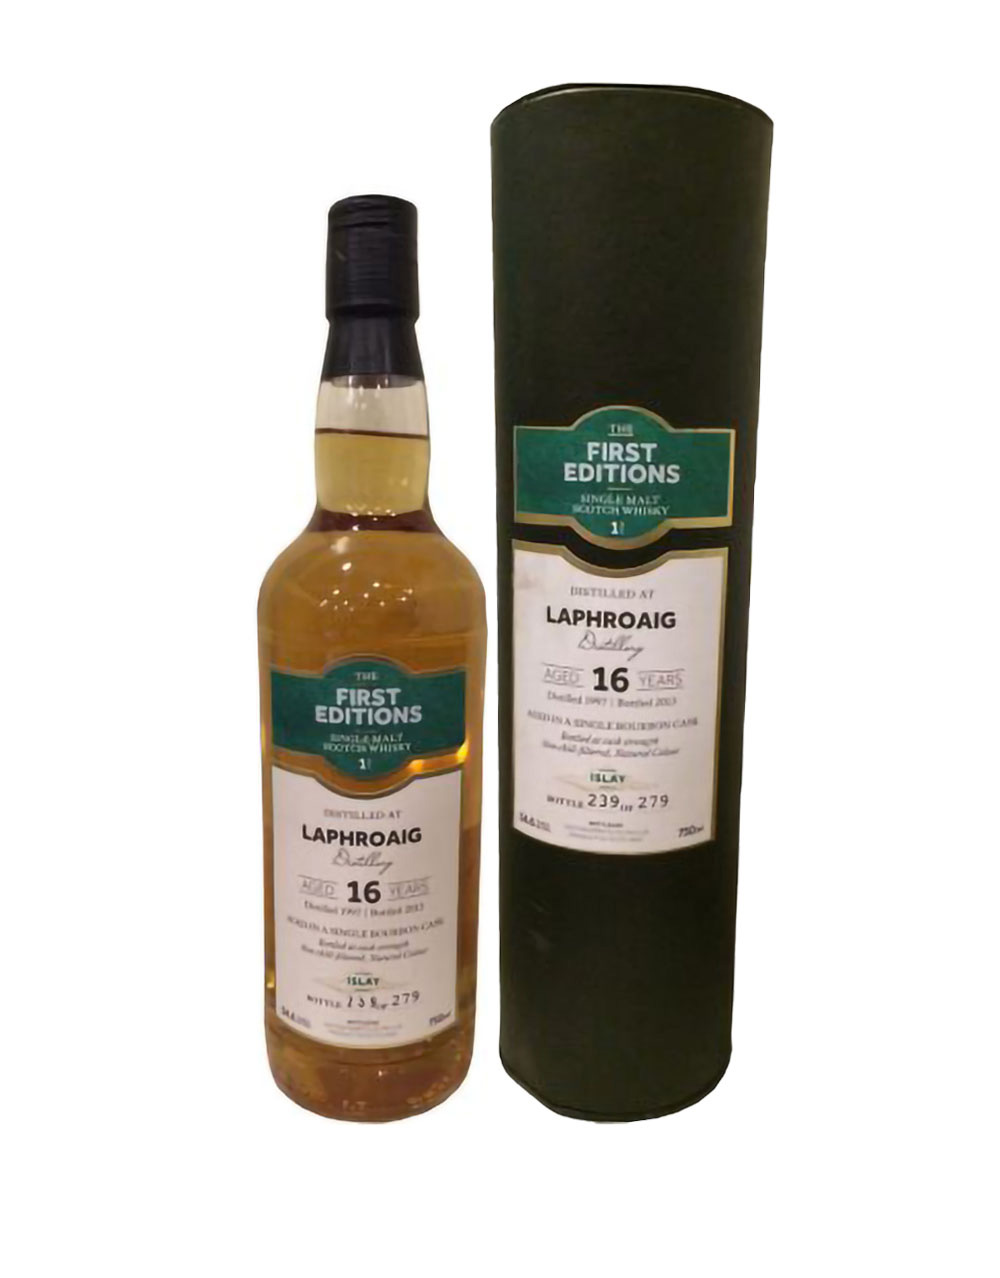 Laphroaig The First Editions 16 Year Old Single Malt Cask Strength Scotch Whisky